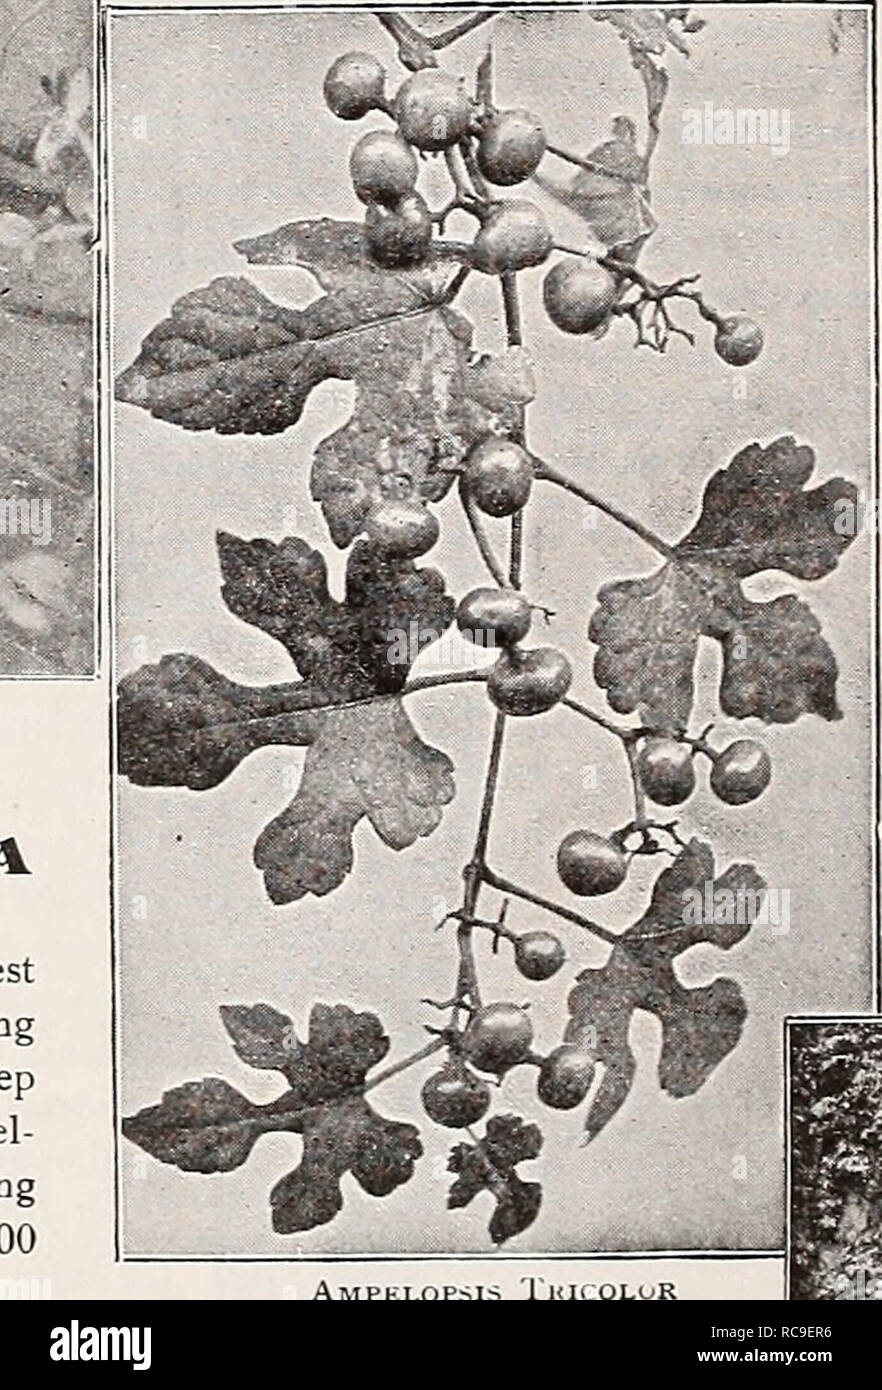 . Dreer's garden book 1921. Seeds Catalogs; Nursery stock Catalogs; Gardening Equipment and supplies Catalogs; Flowers Seeds Catalogs; Vegetables Seeds Catalogs; Fruit Seeds Catalogs. Akebia Quinata AMPELOPSIS QUINQUEFOLIA (Virginia Creeper, or American Ivy) This well known climber is one of the best and quickest growing varieties for covering trees, trellises, arbors, etc.; its large, deep green foliage assumes brilliant shades of yel- low, crimson and scarlet in the fall. Strong plants, 40 cts. each; $4.00 per doz.; $30.00 per 100. AKEBIA OUIIVATA (AkeWaVine) One of the most graceful of our  Stock Photo